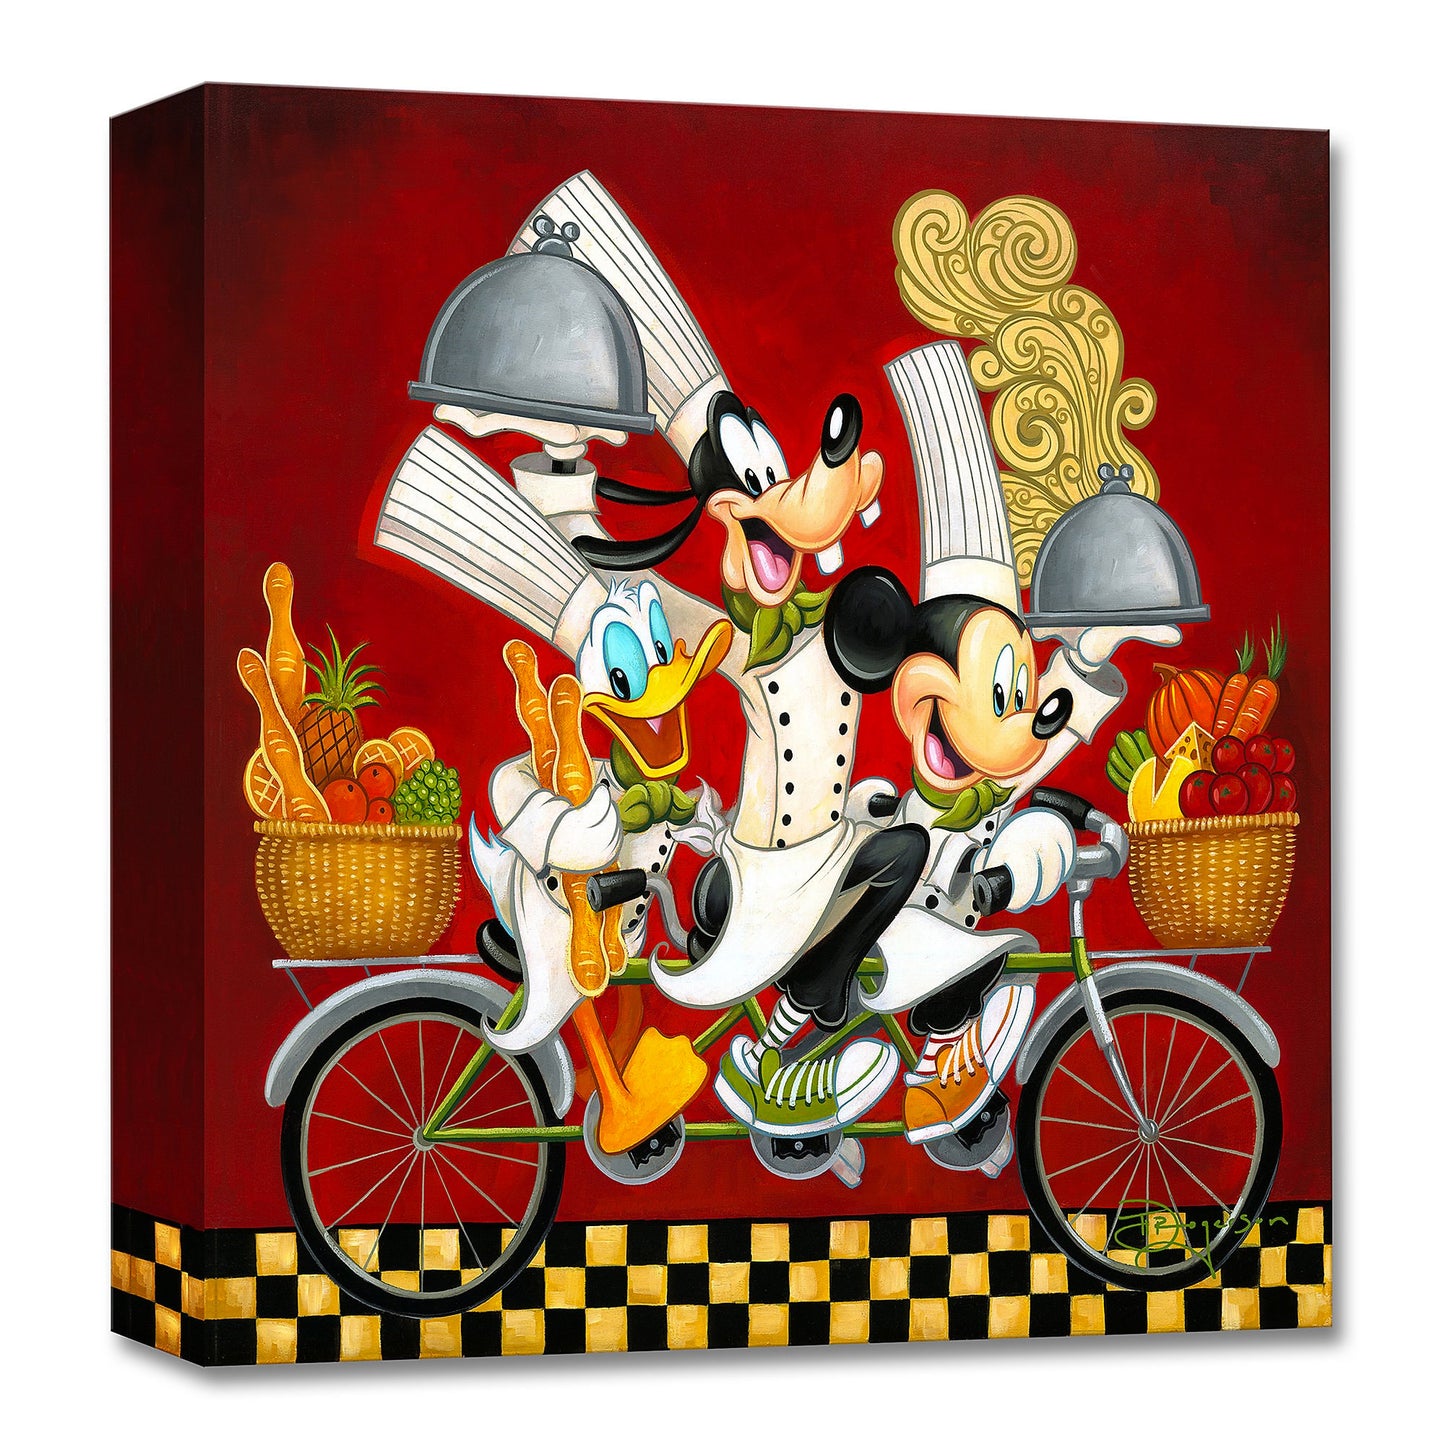 Tim Rogerson Disney "Wheeling With Flavor" Limited Edition Canvas Giclee